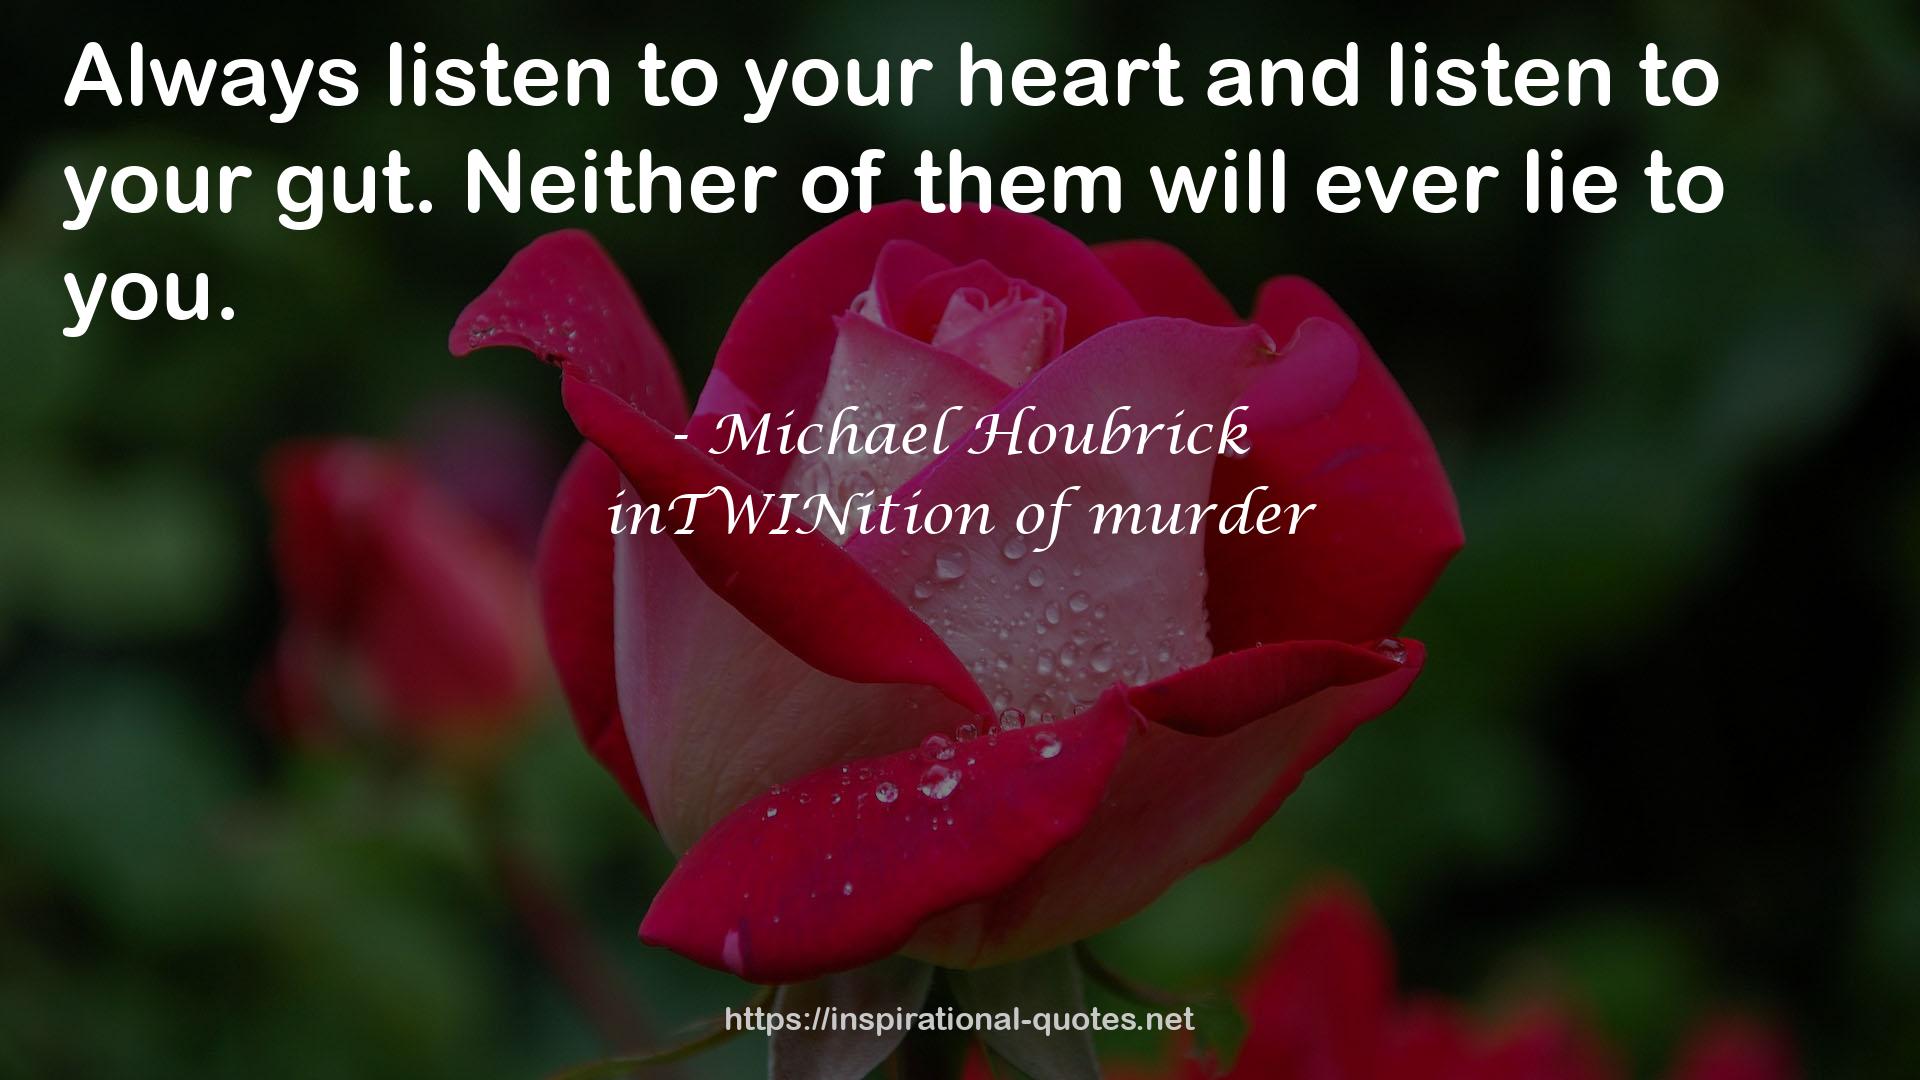 inTWINition of murder QUOTES